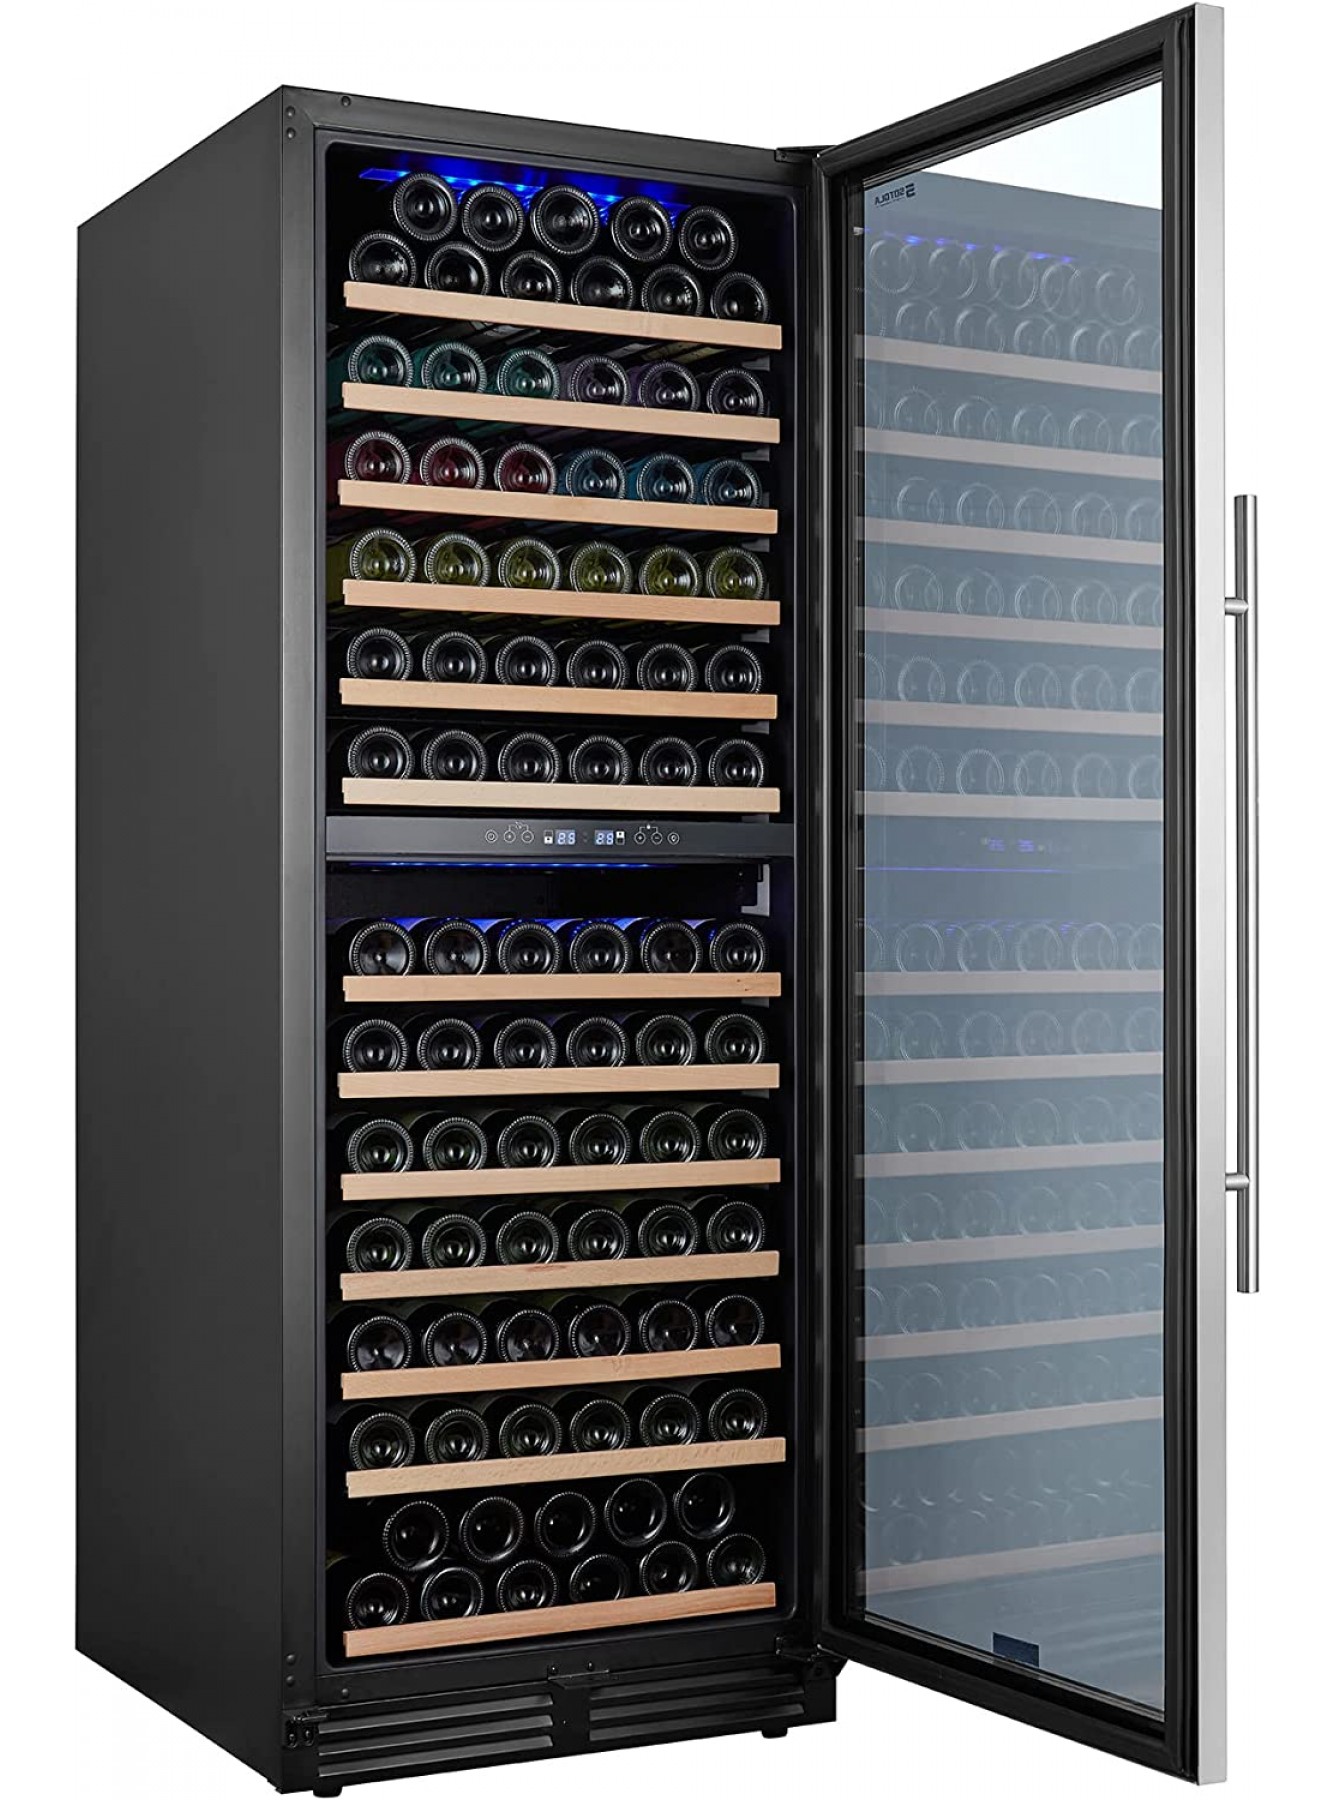 24 Inch Wine Refrigerator 164 bottles Dual Zone Built-in or Freestanding Wine Fridge with Tempered Glass Door and Temperature Memory Function Quiet Operation Upgraded Compressor Wine Cooler B0B3HVJMKR